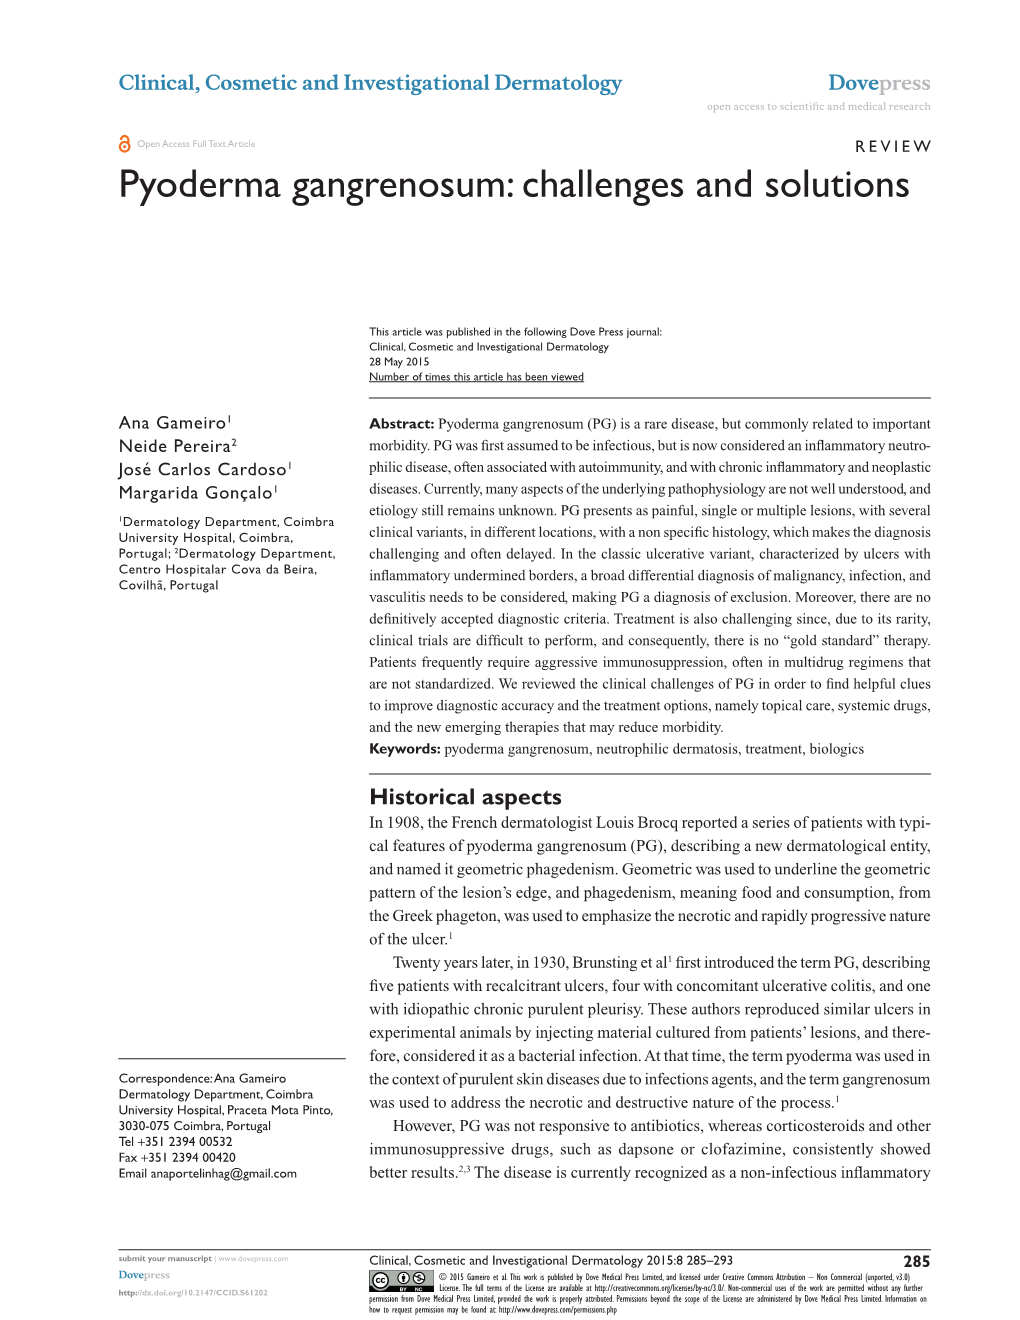 Pyoderma Gangrenosum: Challenges and Solutions